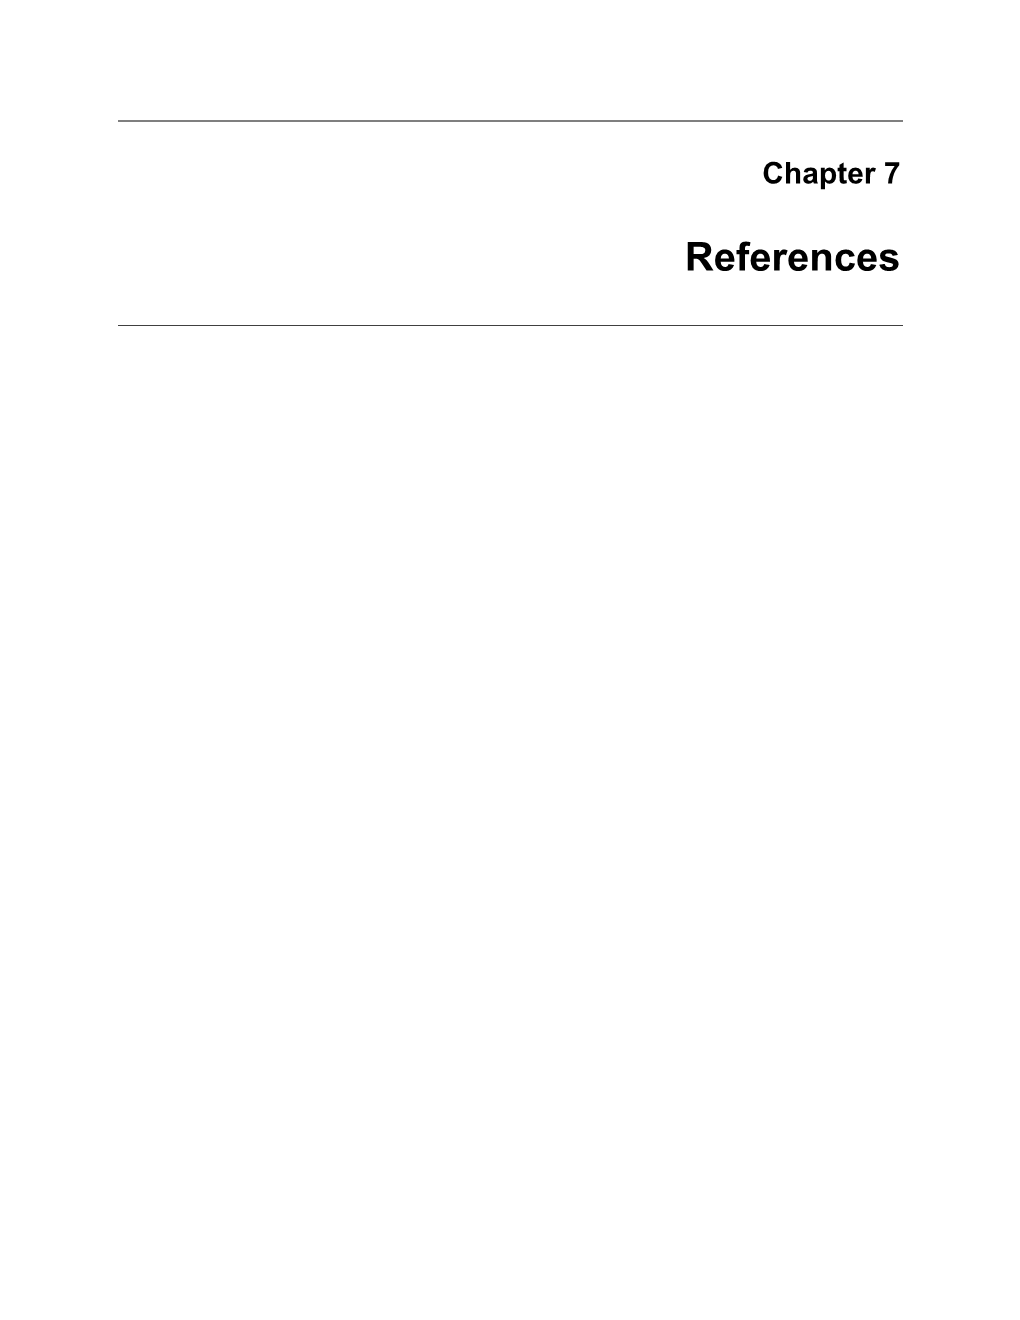 Chapter 7: References